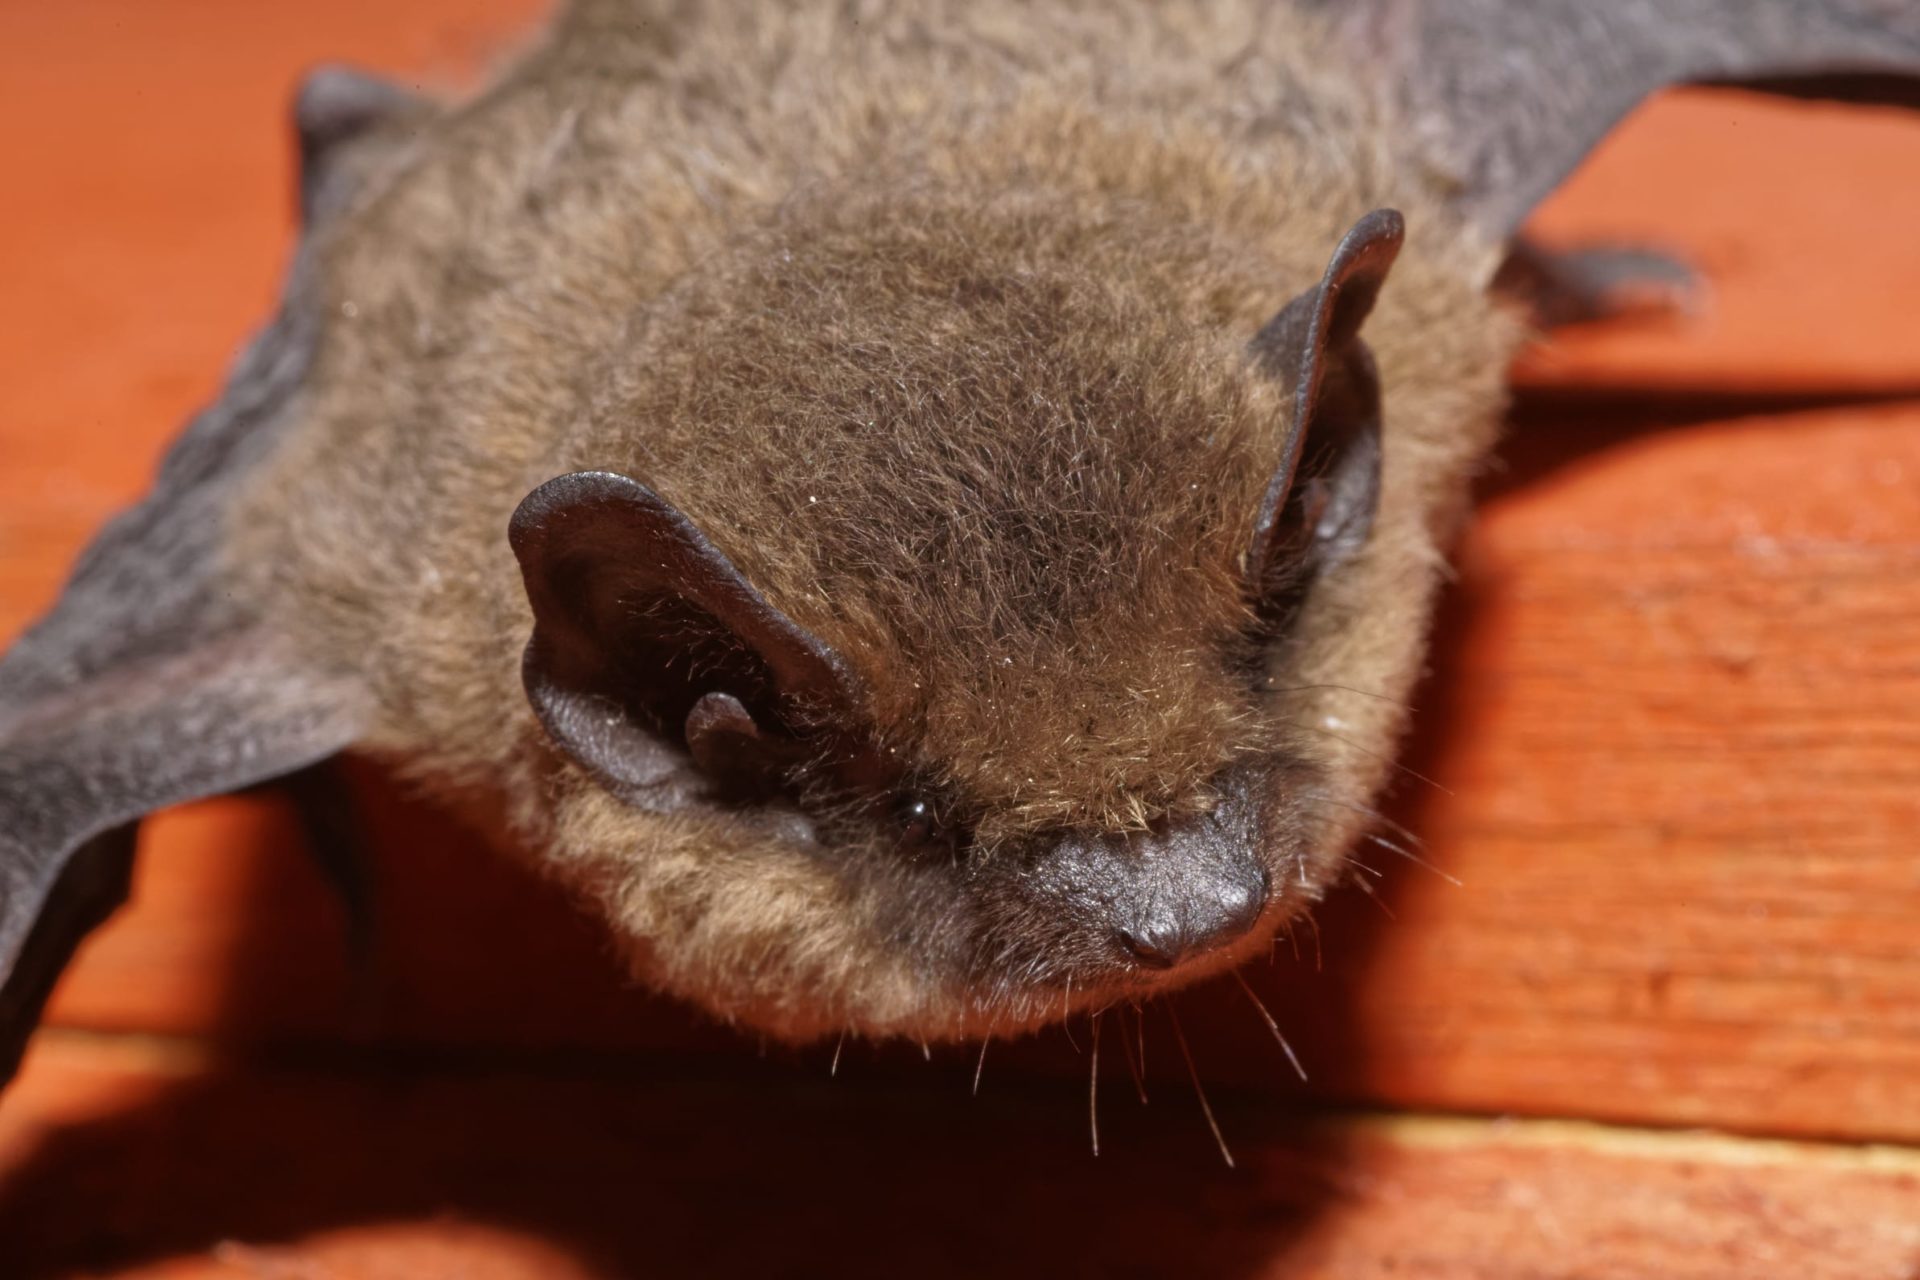 Despite their reputation, there are many benefits of bats. A pipistrelle bat.